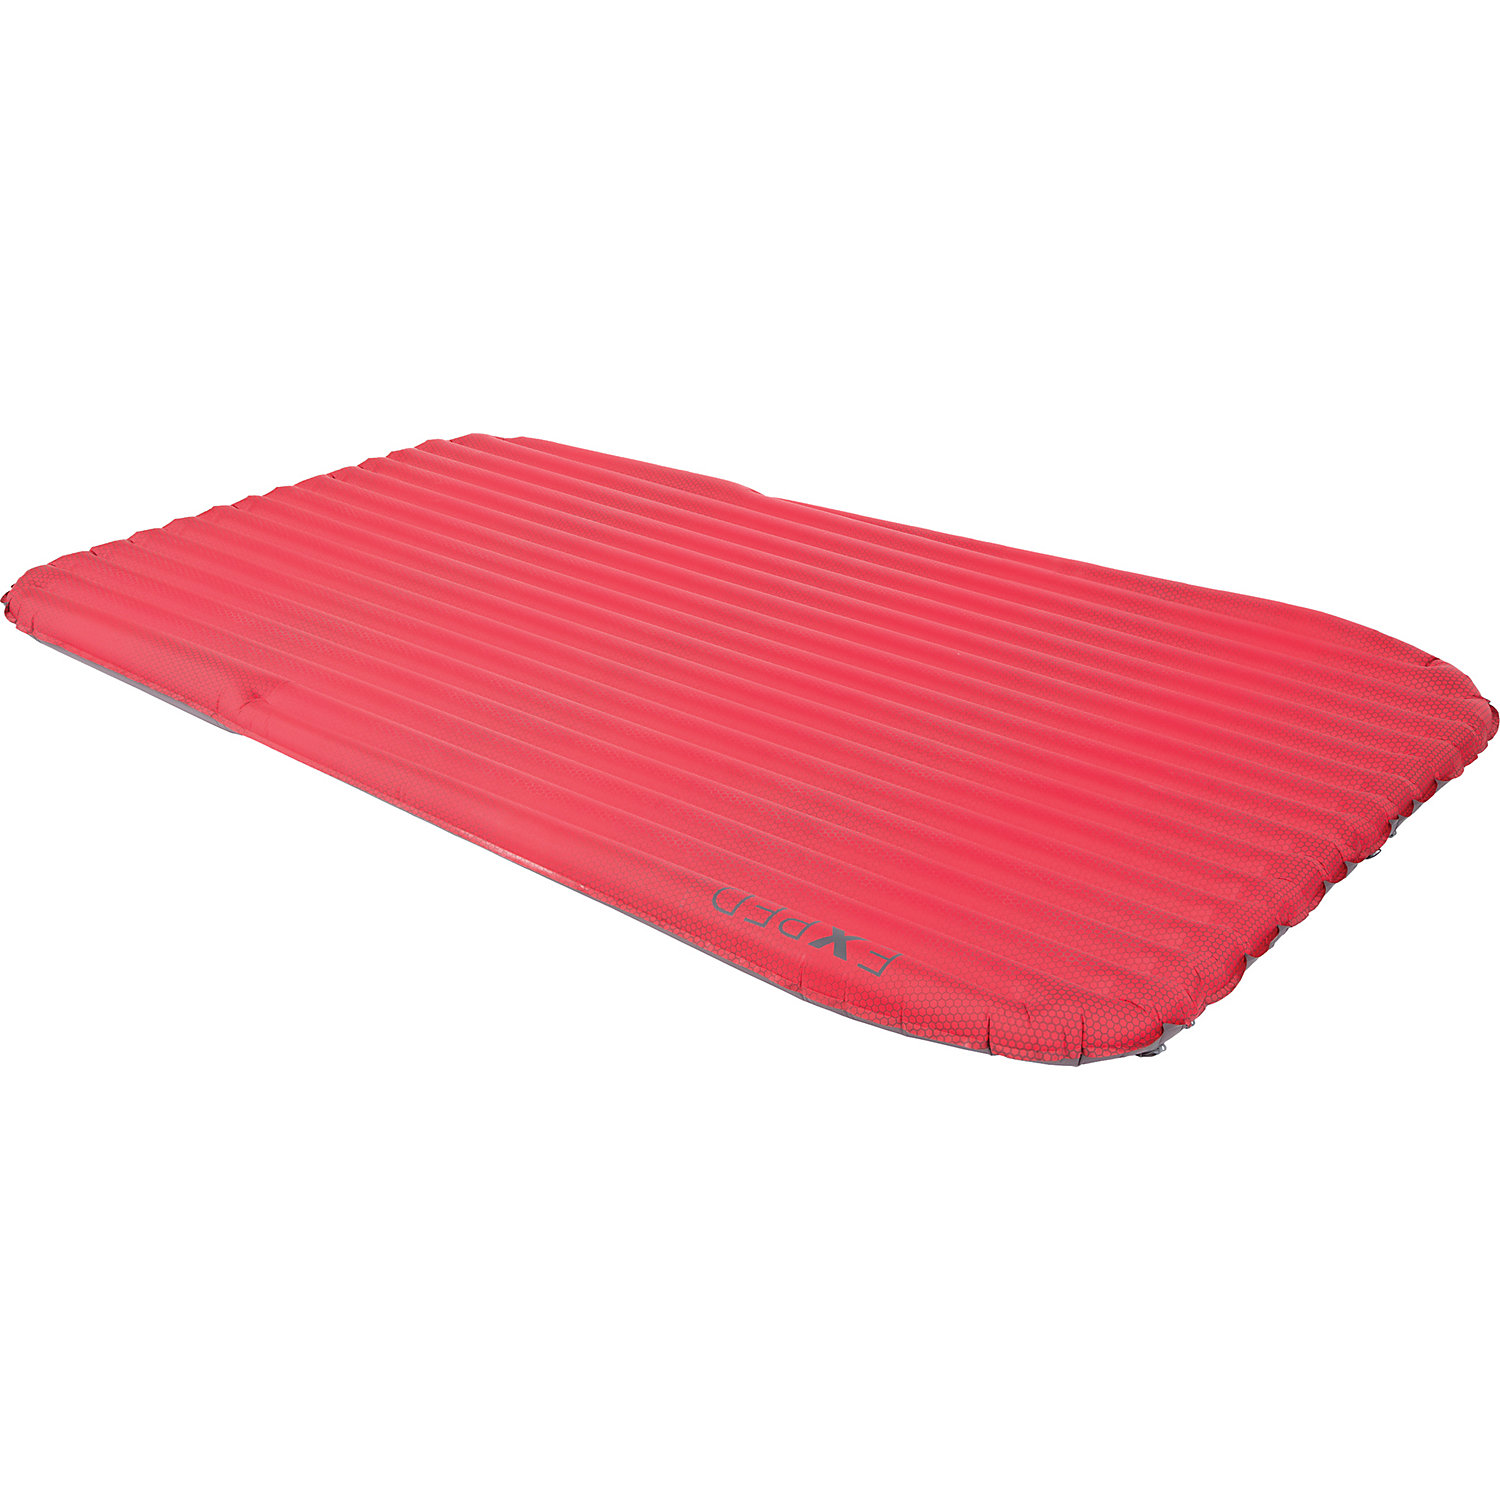 Exped SynMat HL Duo Winter Sleeping Pad - Large Wide, Red